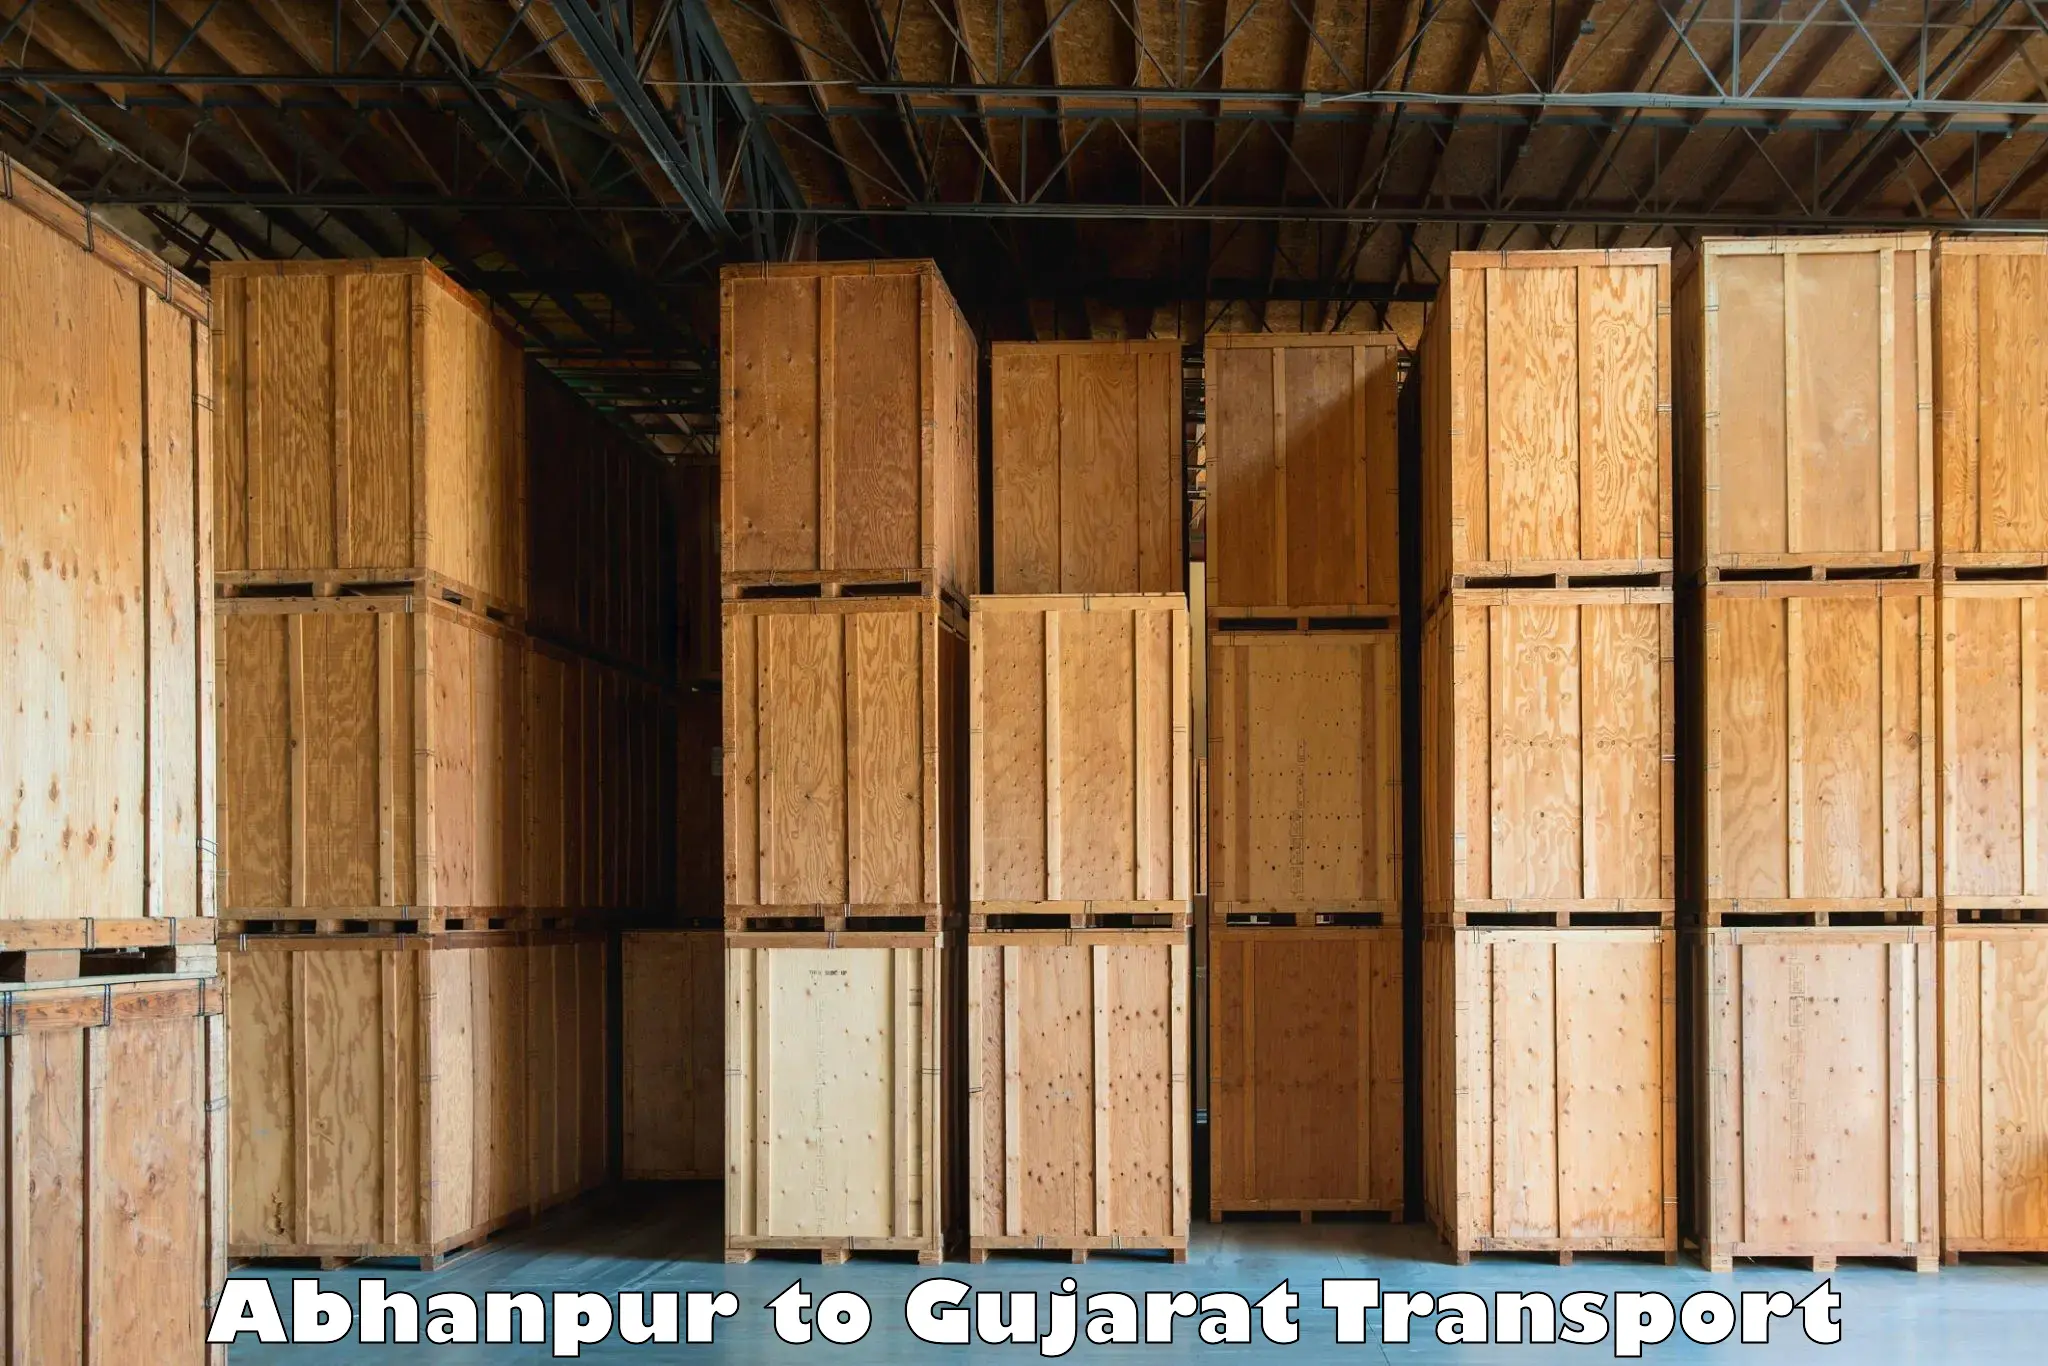 Express transport services Abhanpur to Dahod